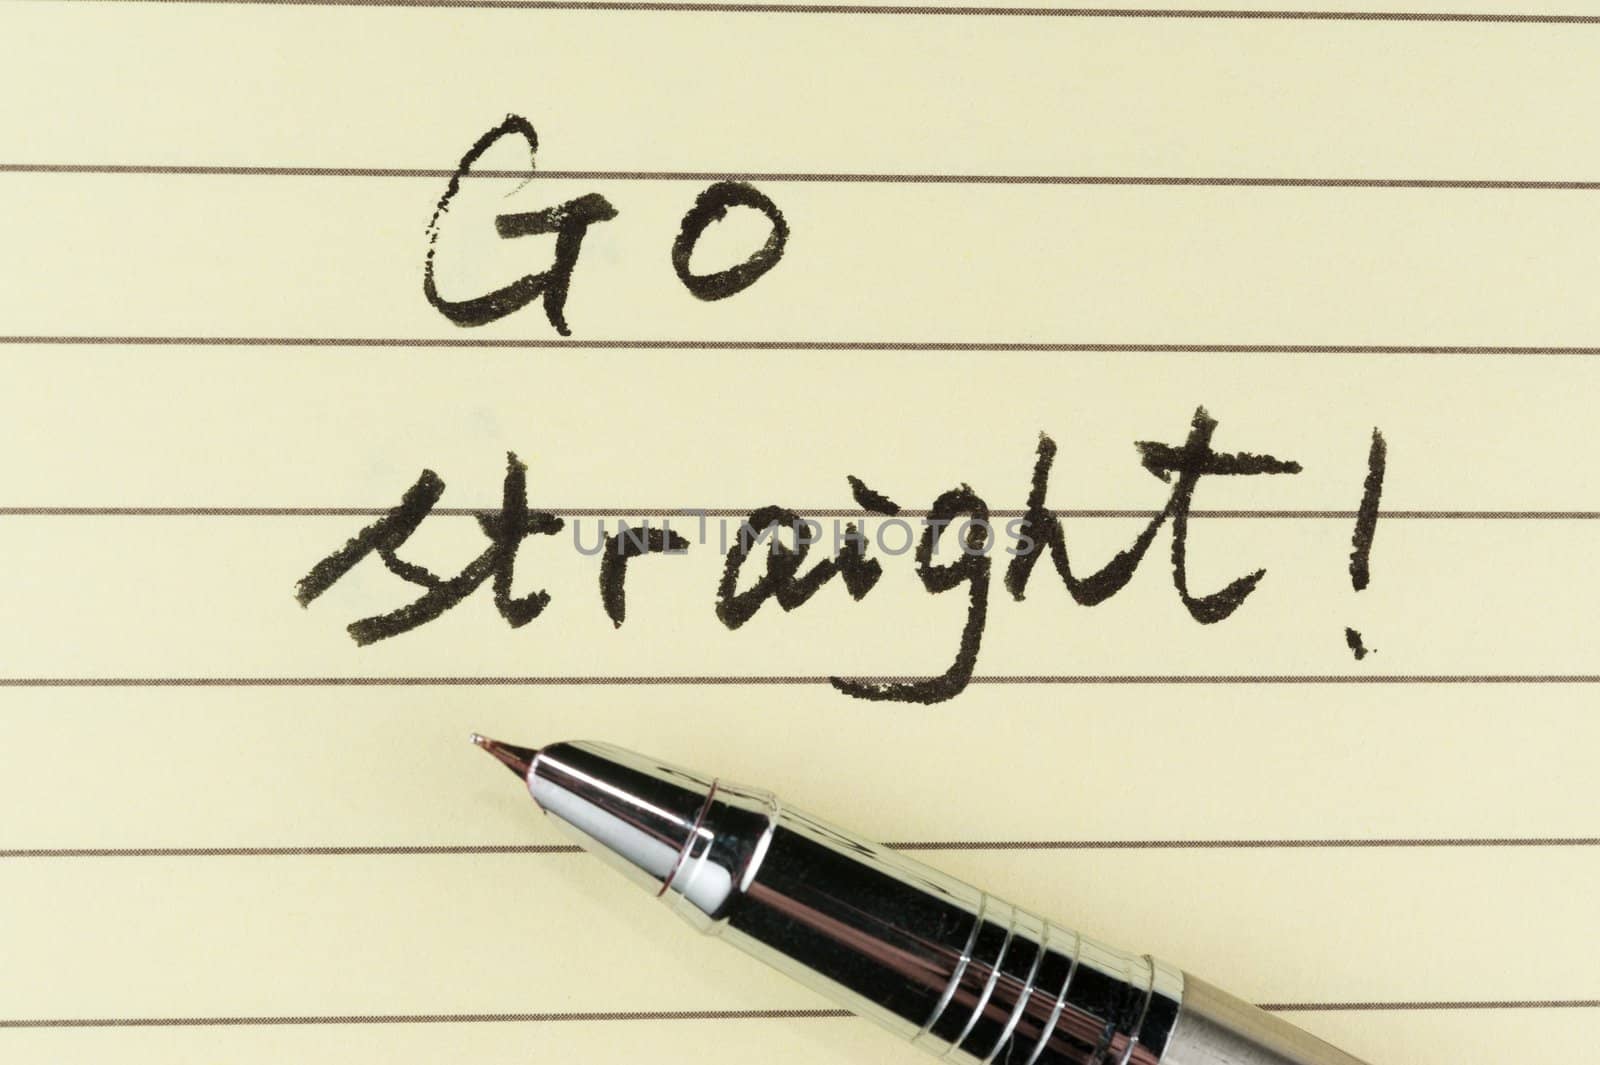 Go straight words written on lined paper with a pen on it